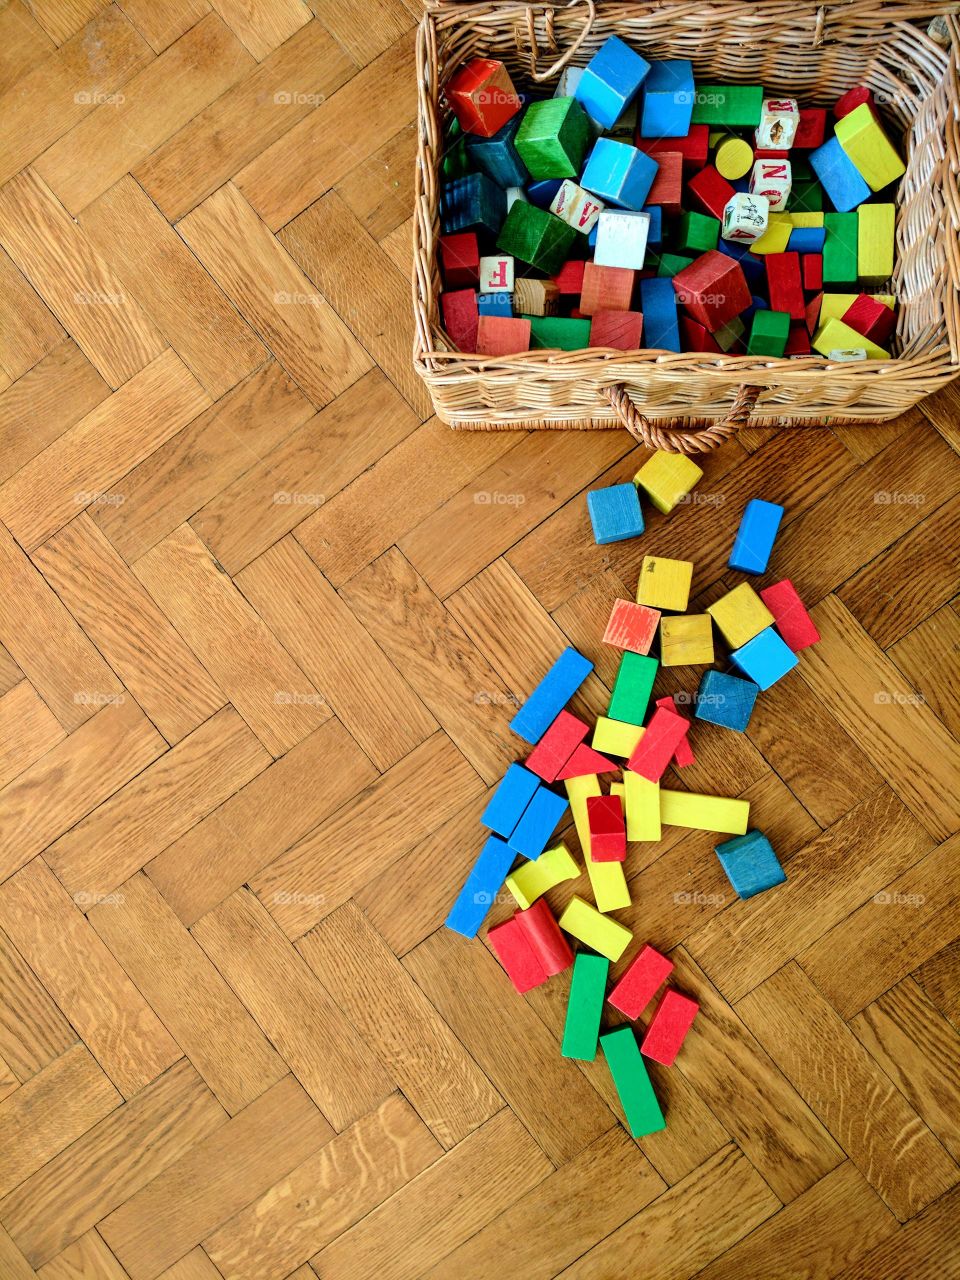 Child's toy coloured wooden building blocks/bricks splicing out of a basket.